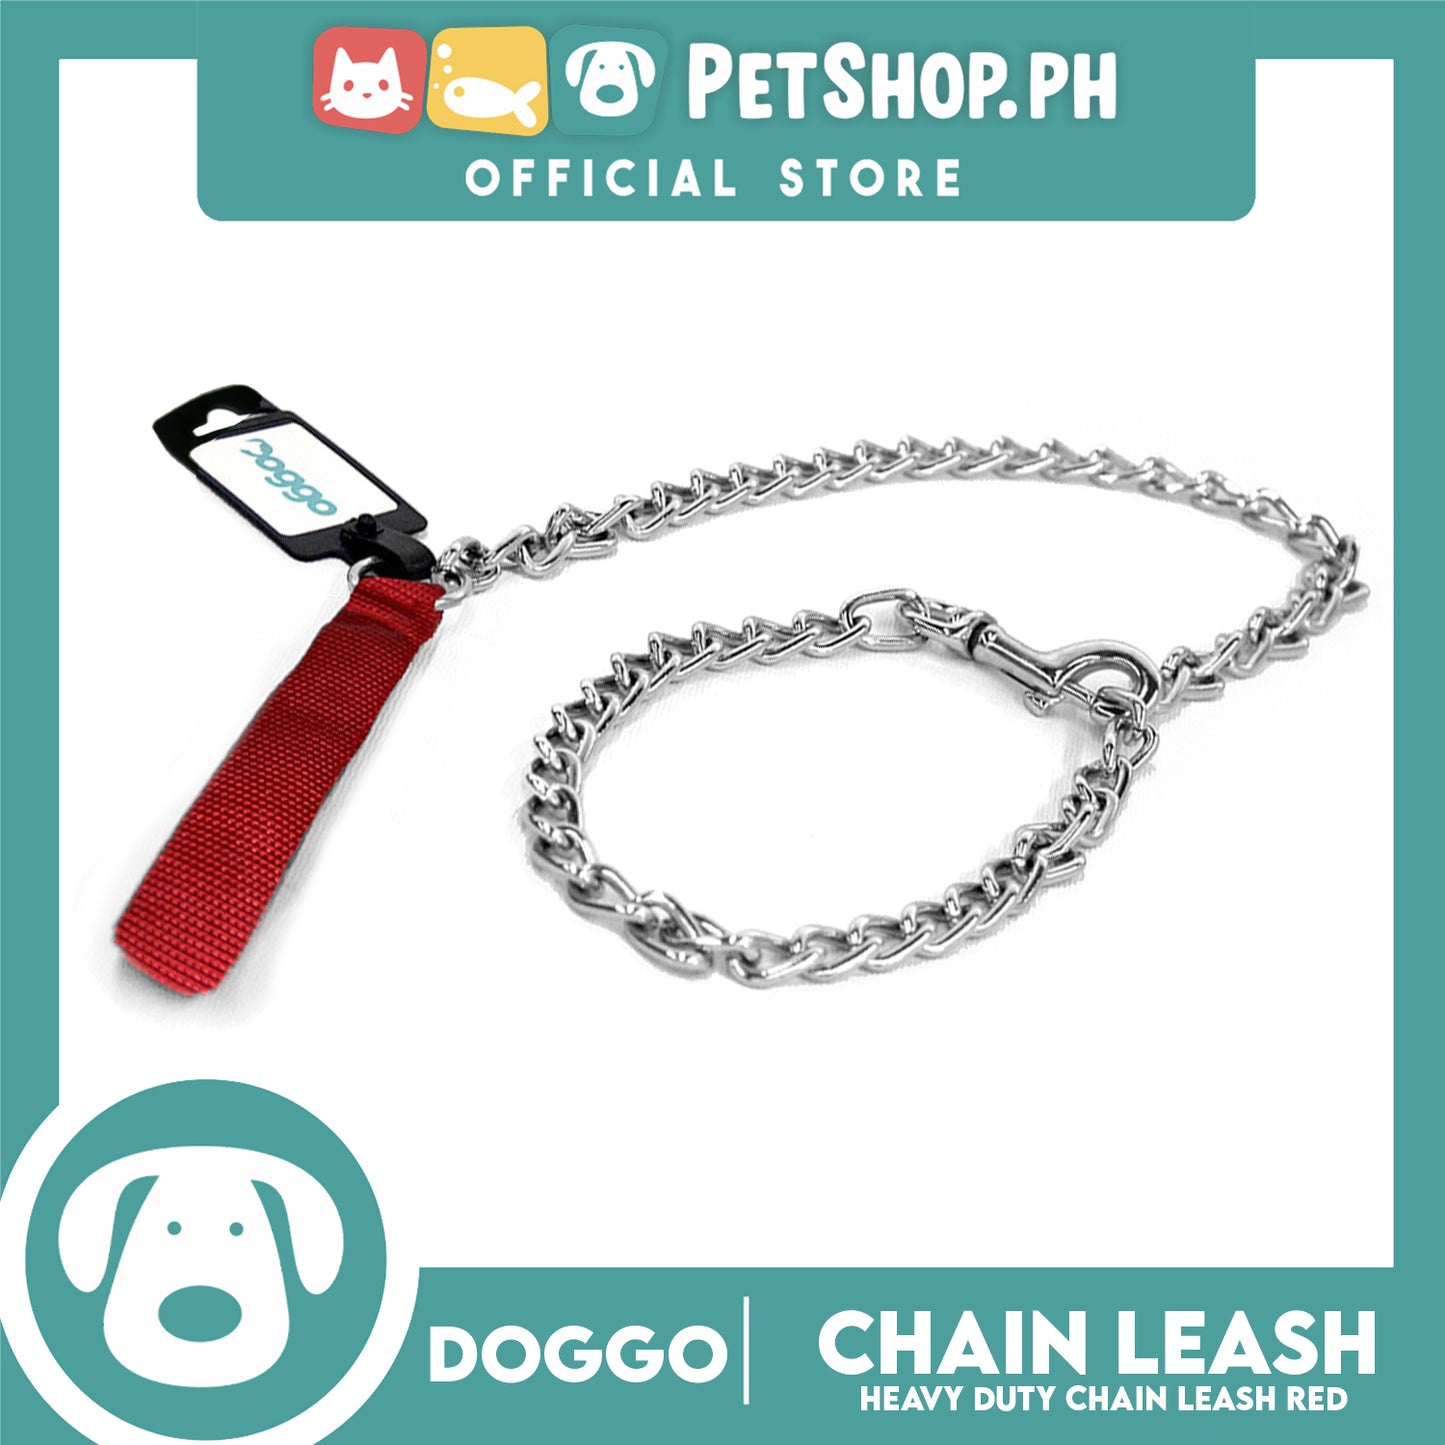 Doggo Heavy Duty Chain Leash (Red) 42 inches Leash Length for Your Dog